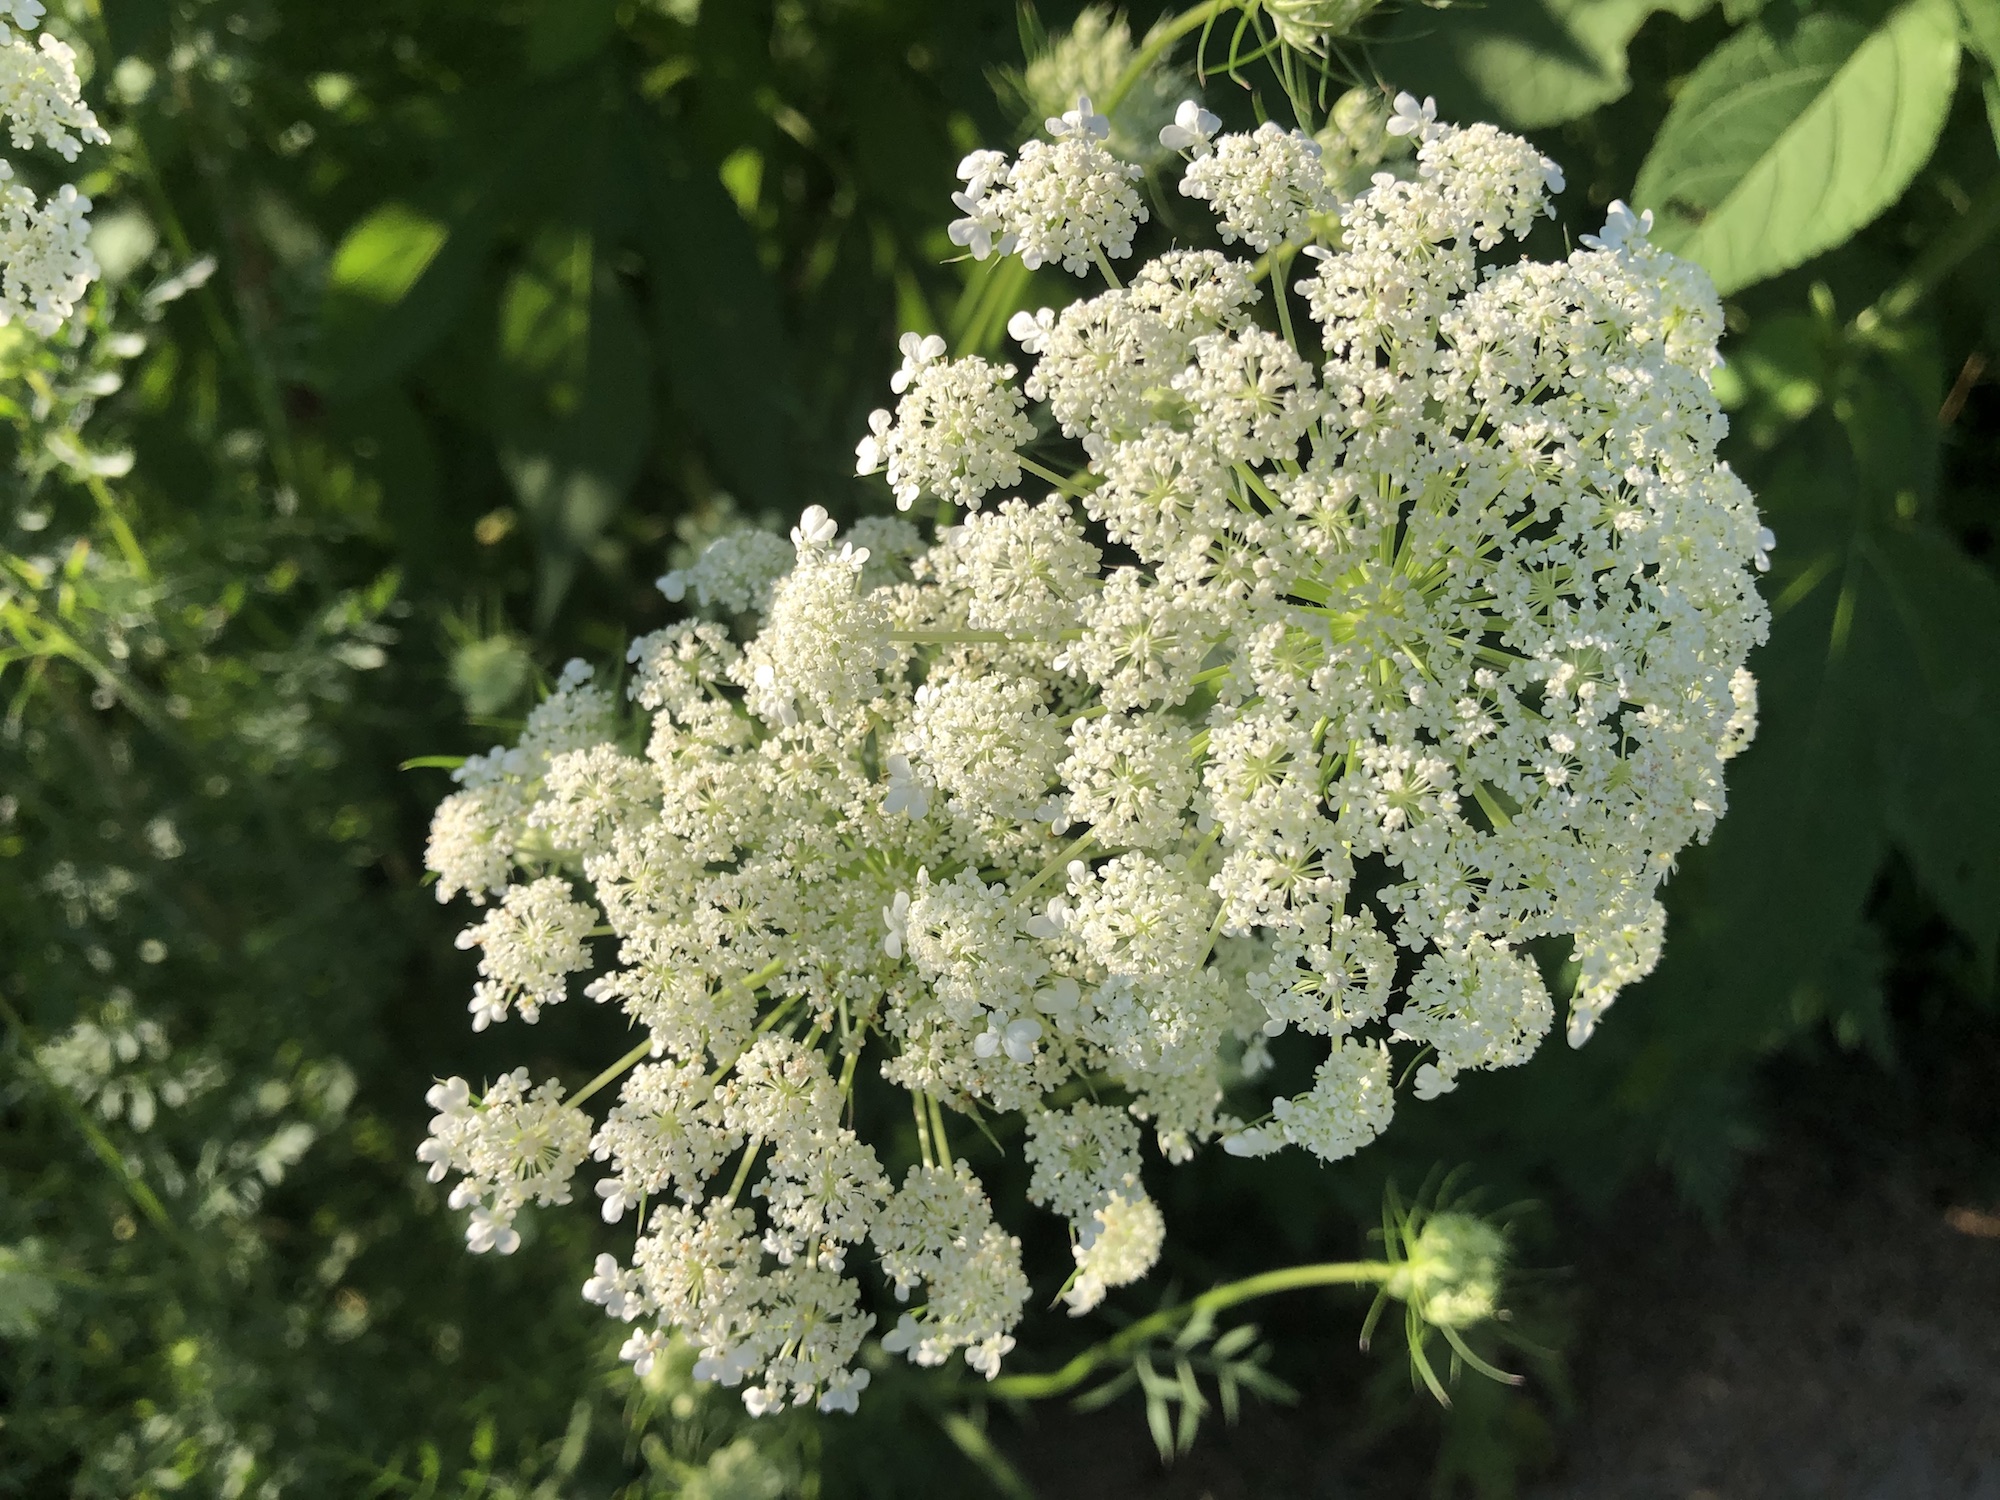 Queen Anne's Lace on bank of retaining pond on the corner of Nakoma Road and Manitou Way in Madison, WI on July 19, 2020.